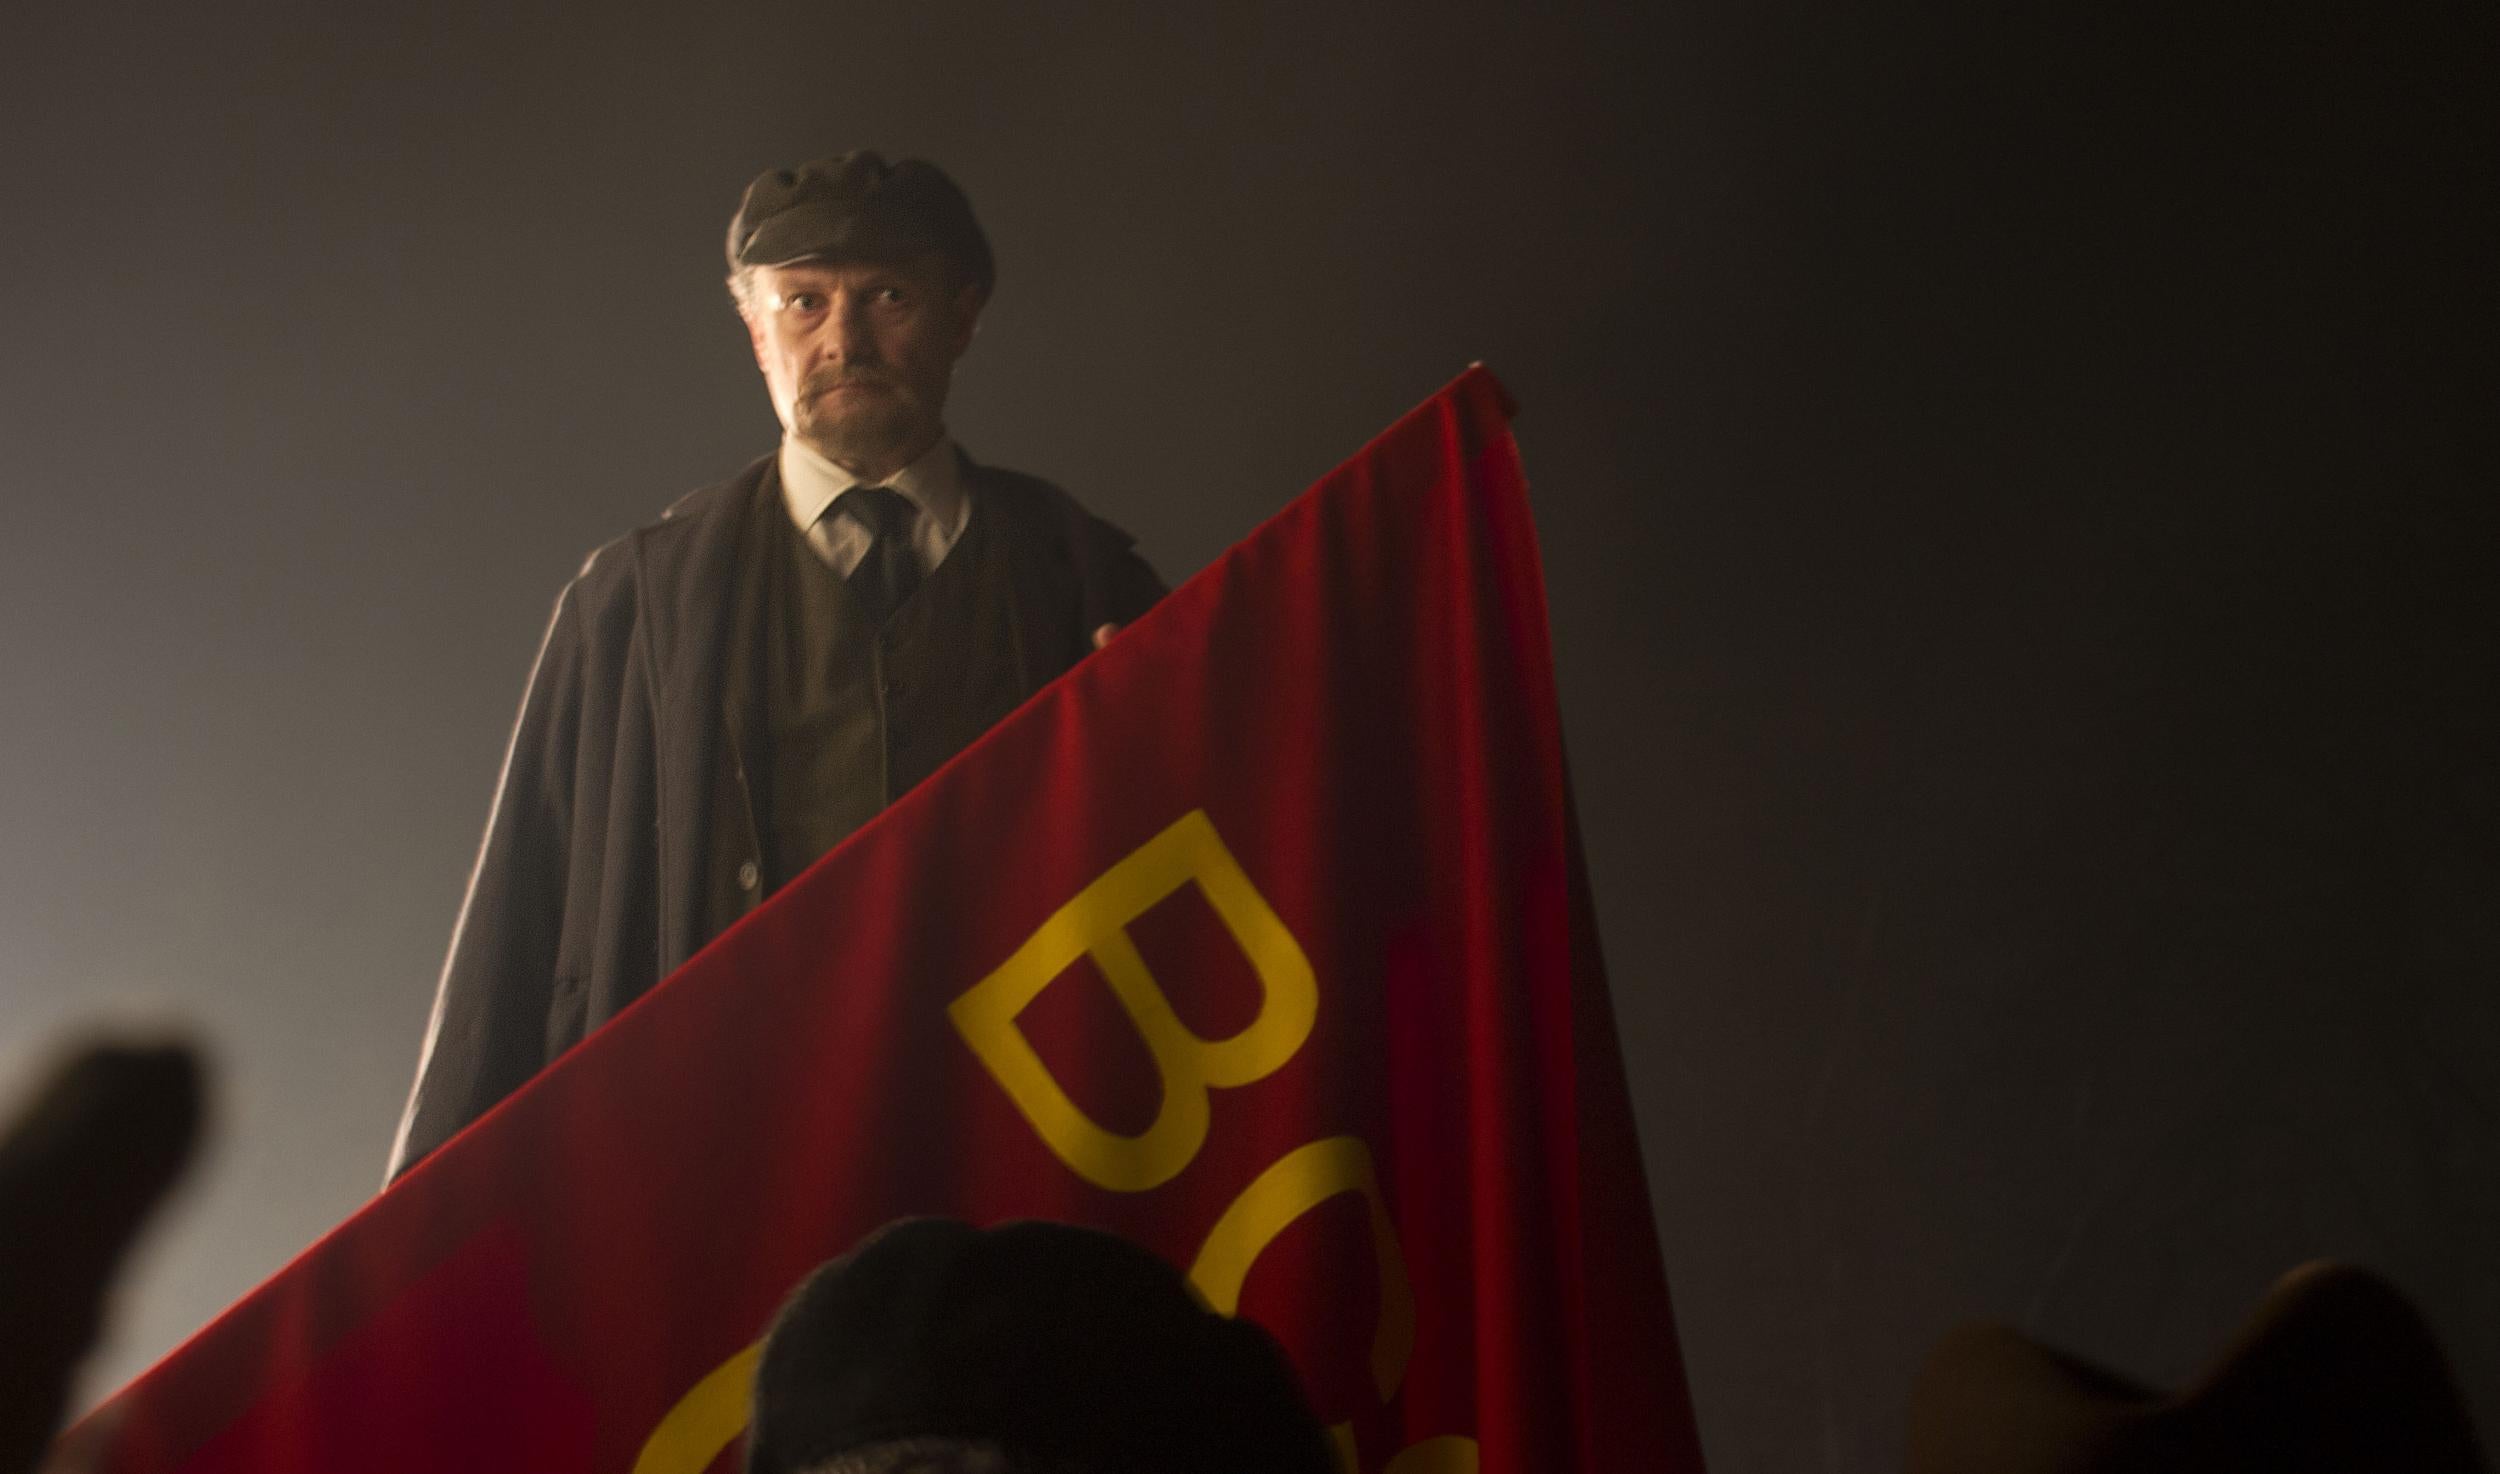 Nicholas Asbury plays a nicely intense Lenin in this reconstruction of the Russian Revolution